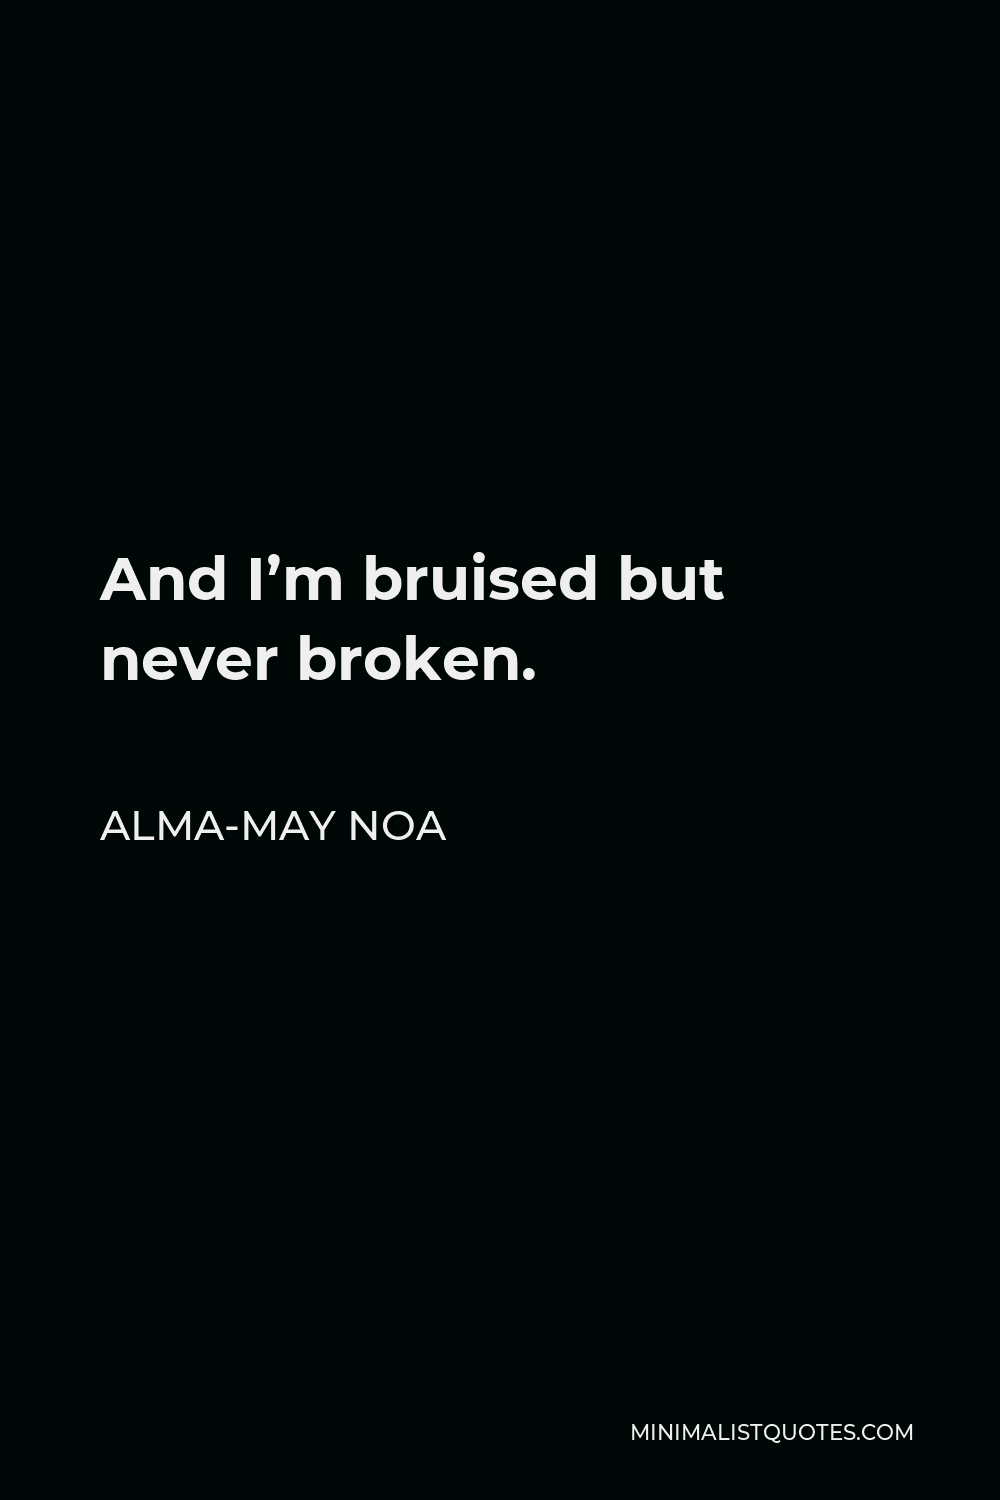 Alma-May Noa Quote - And I’m bruised but never broken.